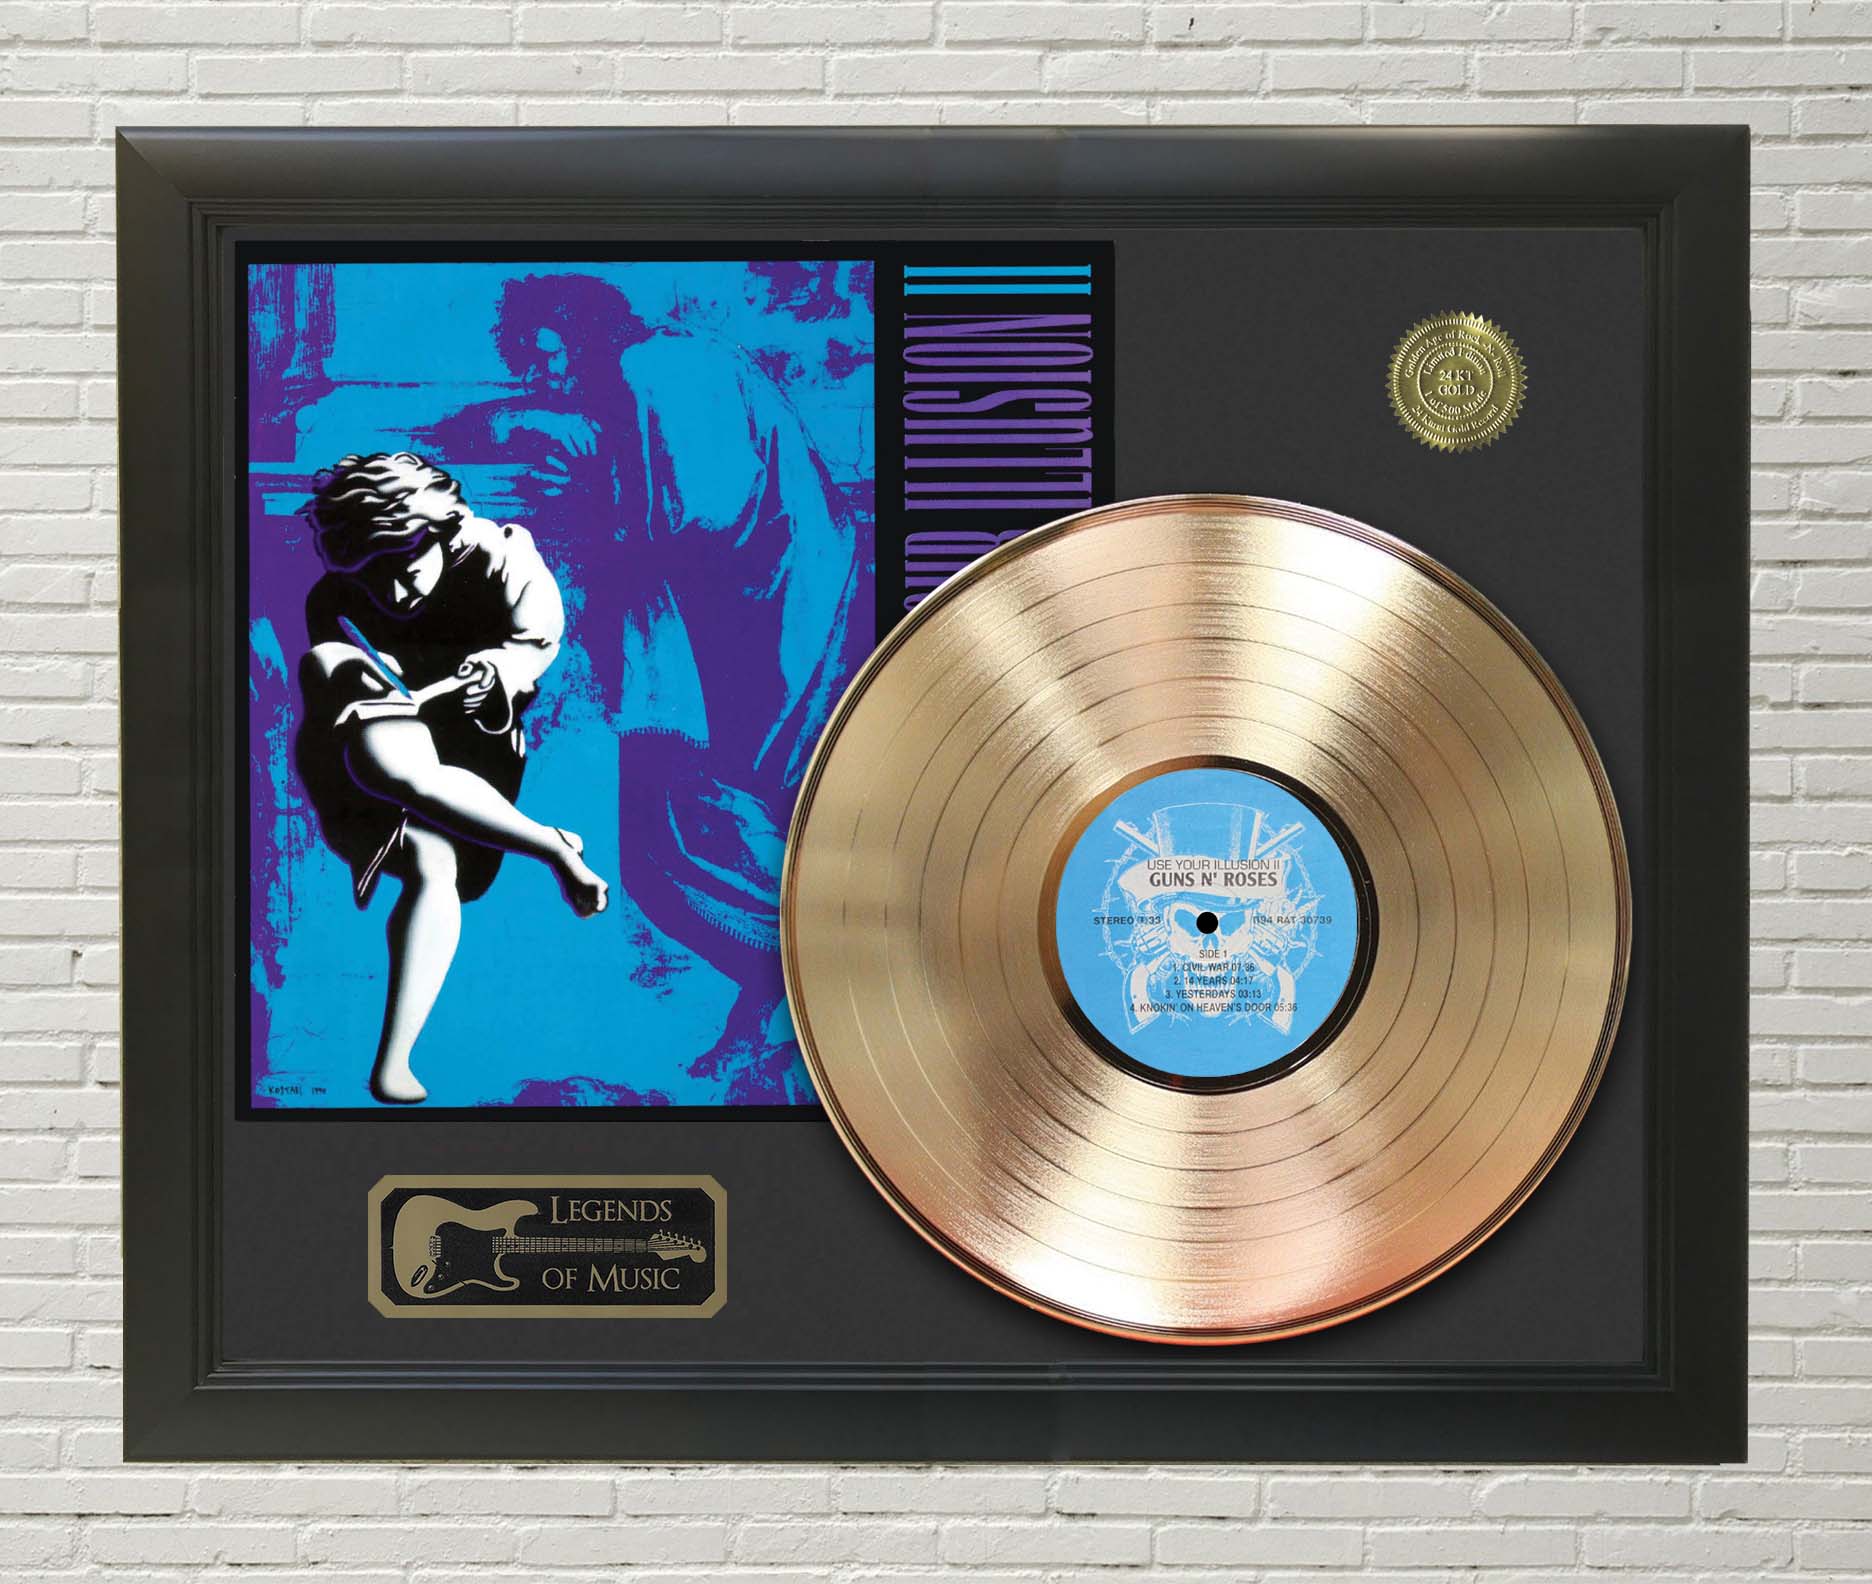 Guns N Roses – Use Your Illusion 2 Framed Gold LP Record 